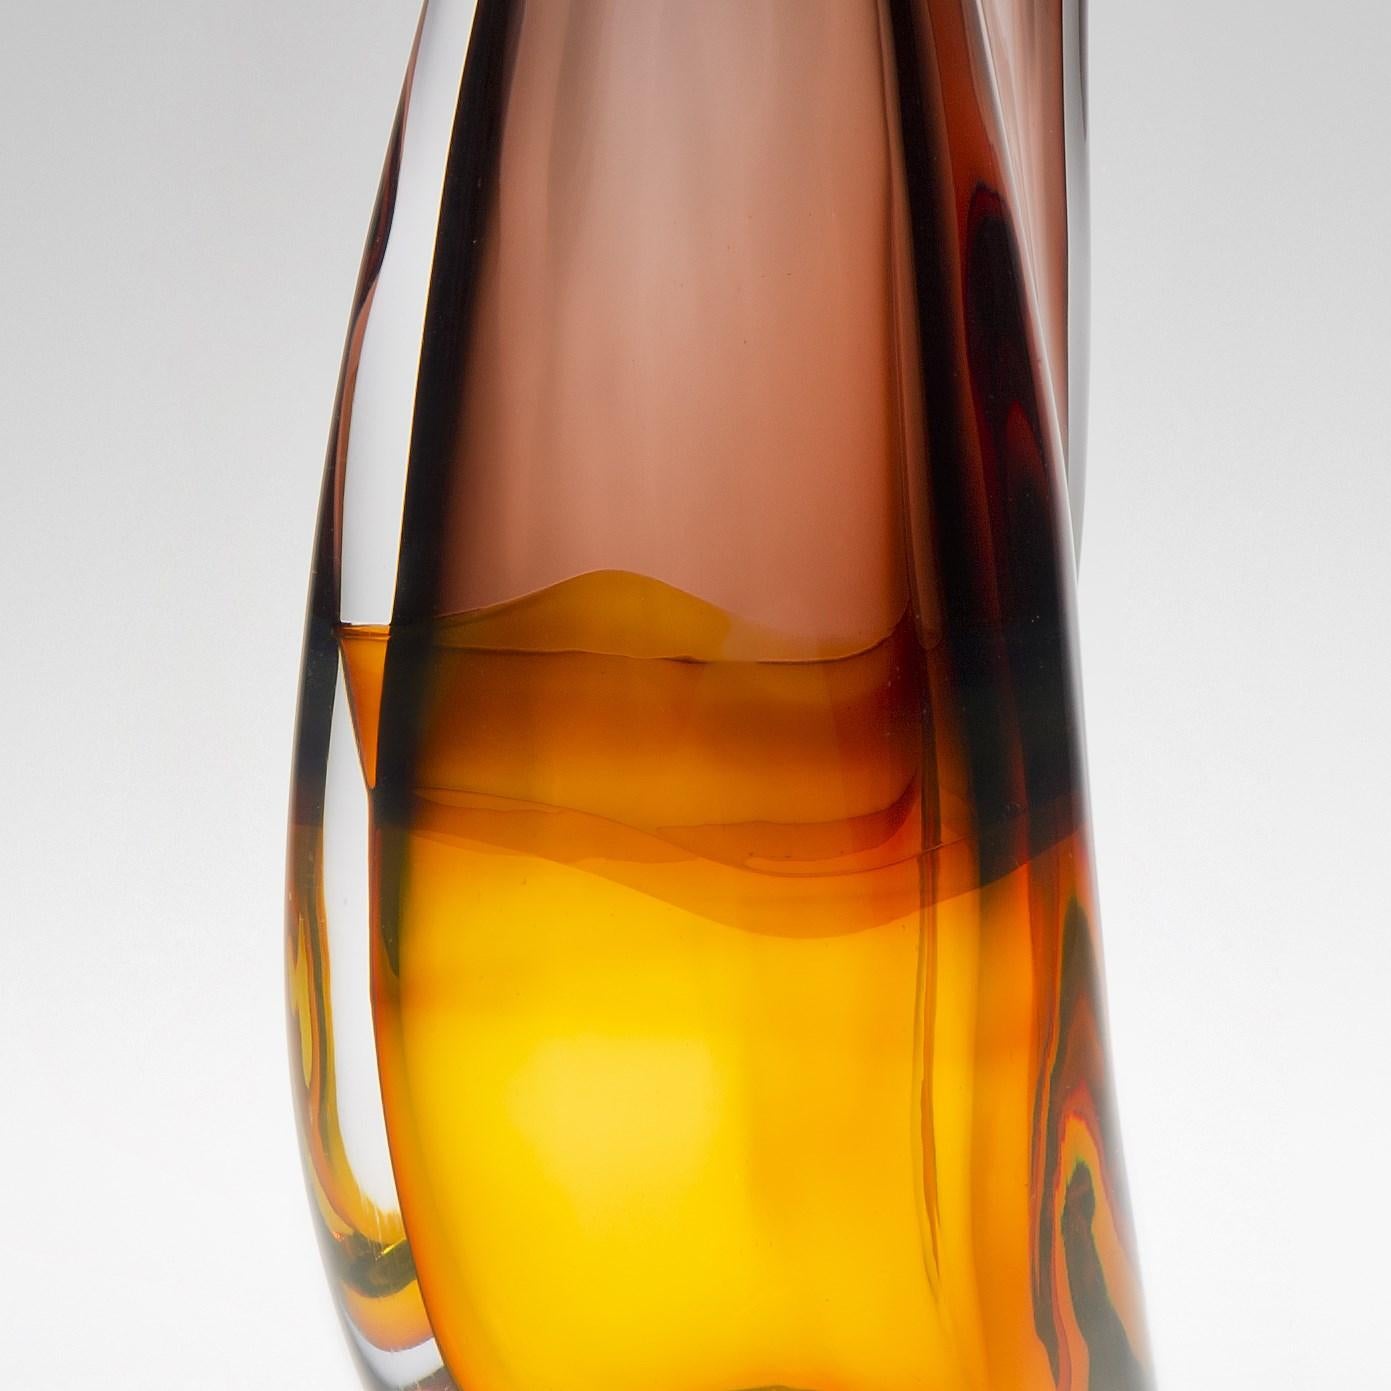 Organic Modern Sommercalmo 82, a Sculptural Glass Vase in Golden Amber & Brown by Vic Bamforth